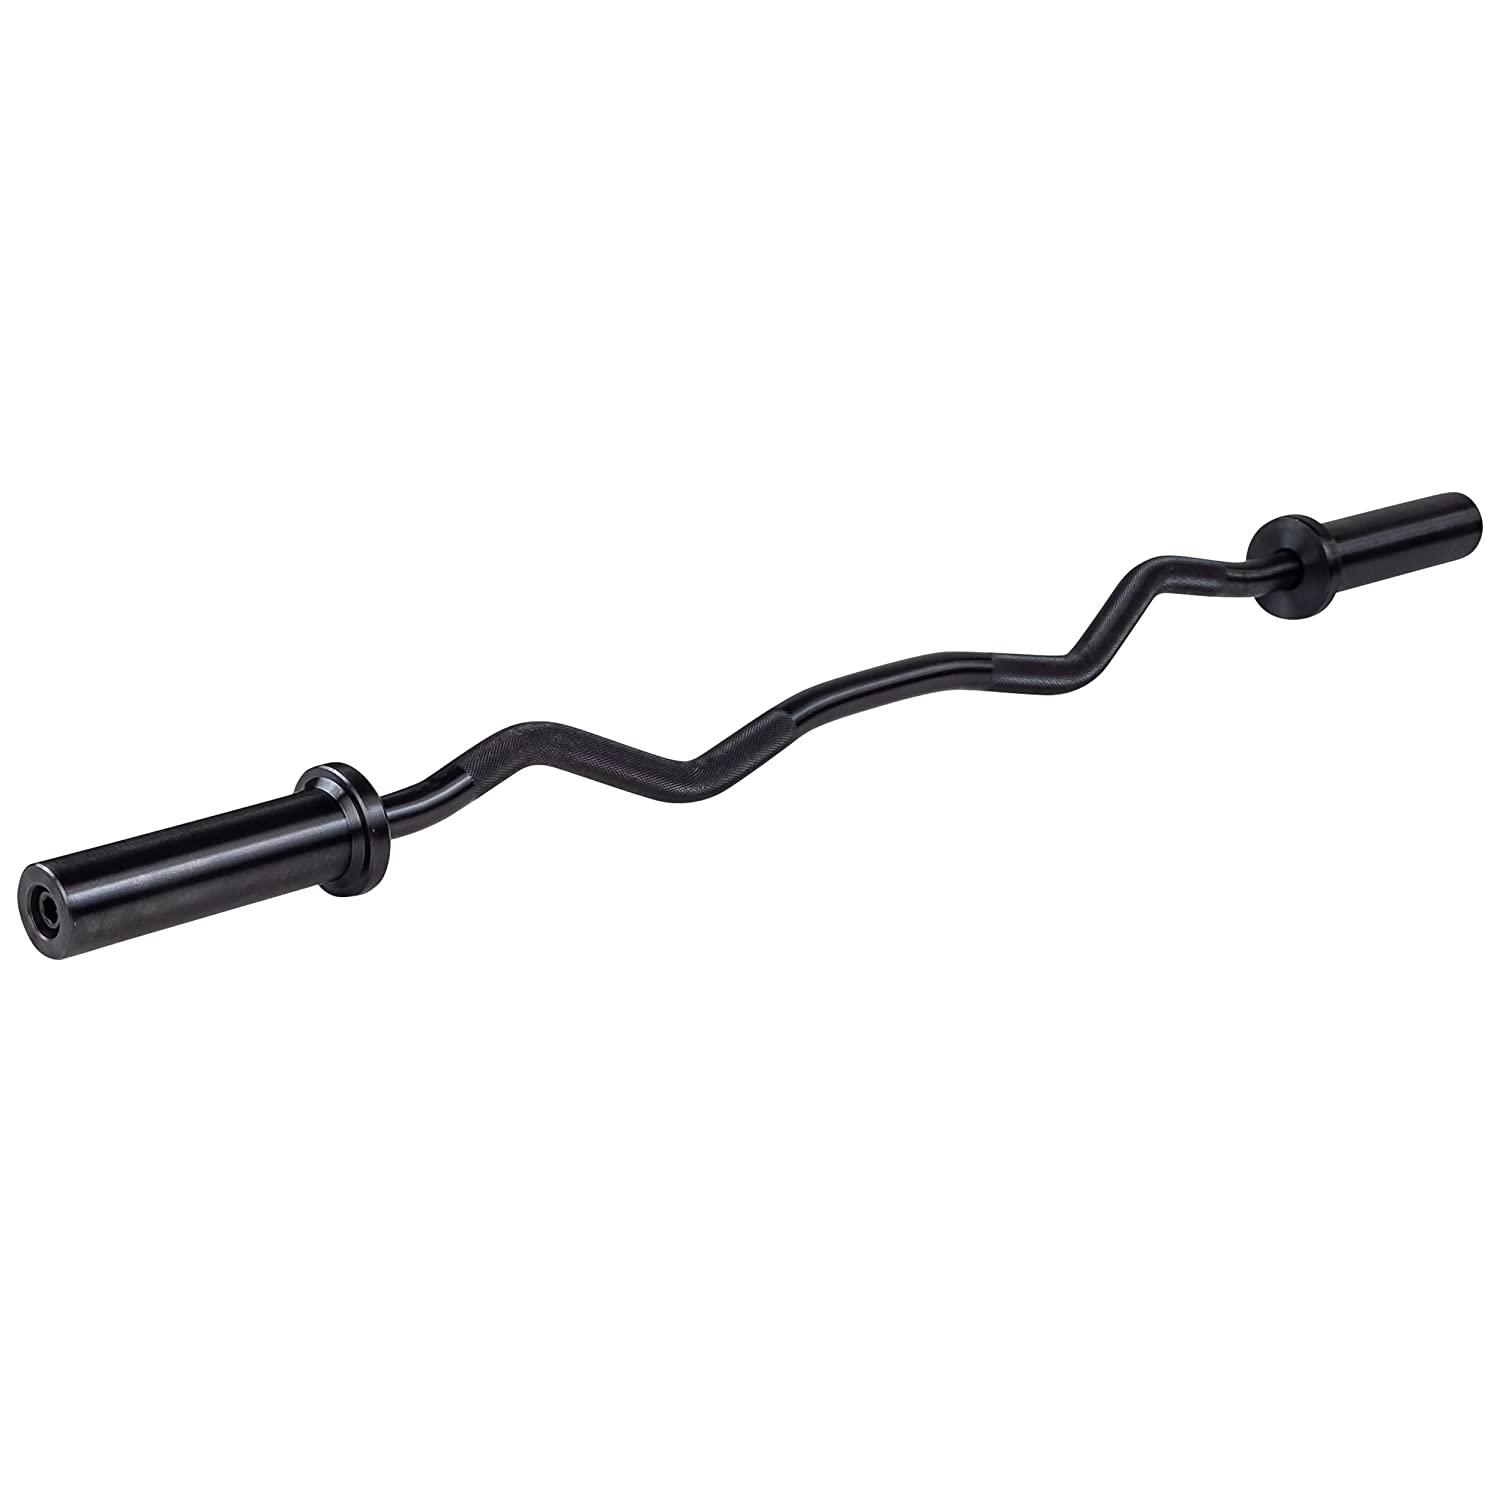 Olympic EZ Curl Bar - 2 Inch, Weightlifting Barbell for Bicep, Tricep & Arm Workouts at Home & in The Gym